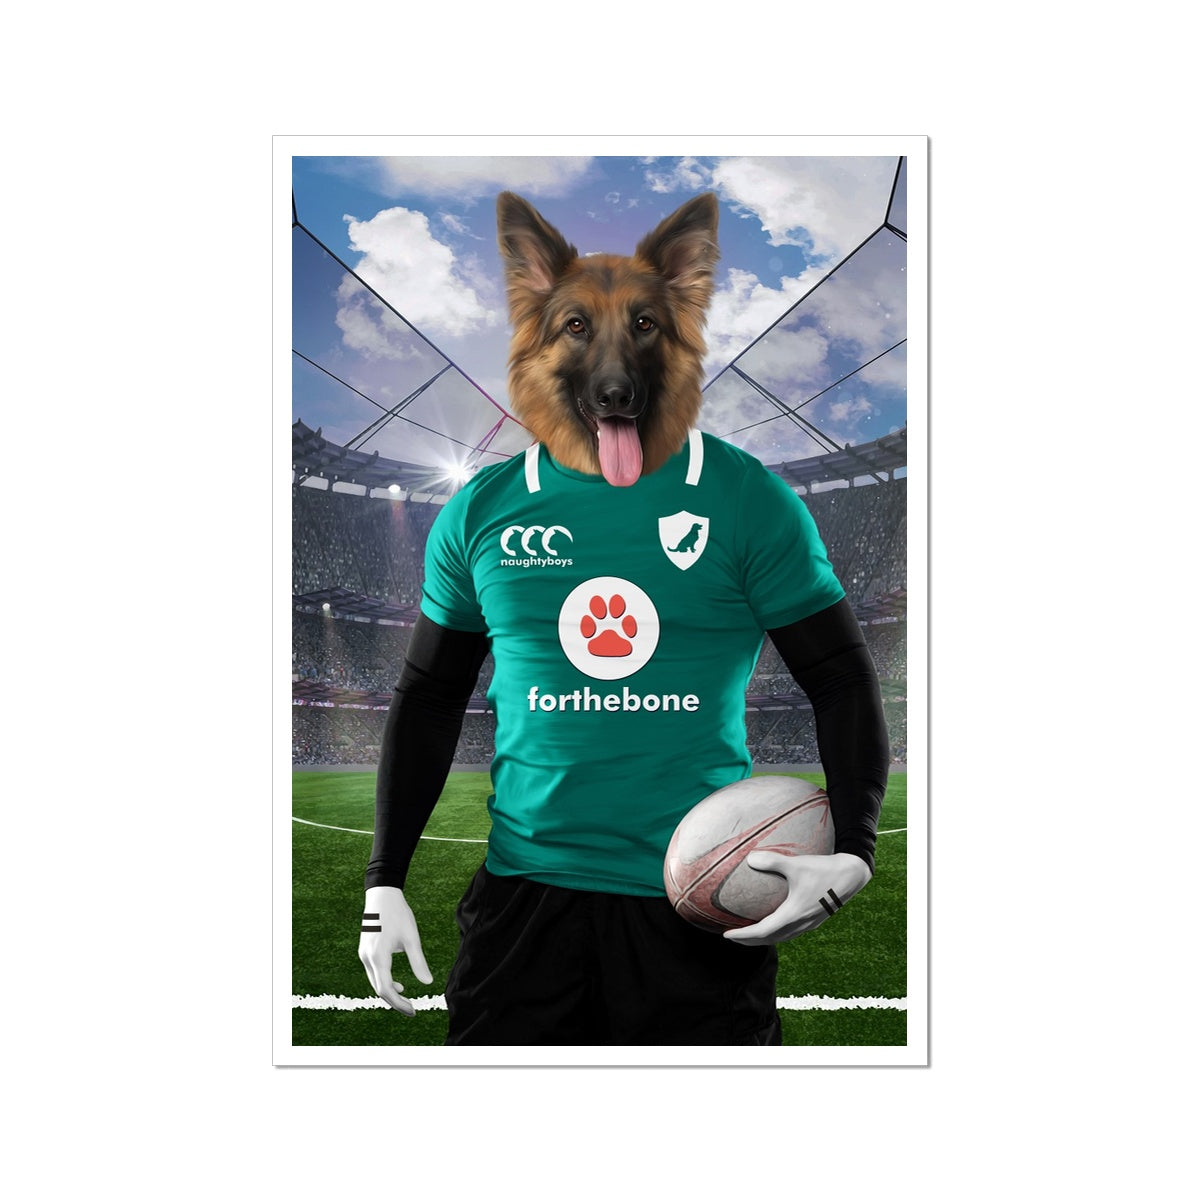 Ireland Rugby Team: Paw & Glory, paw and glory, best dog artists, aristocrat dog painting, dog drawing from photo, pet portraits leeds, dog portrait background colors, drawing dog portraits, pet portrait